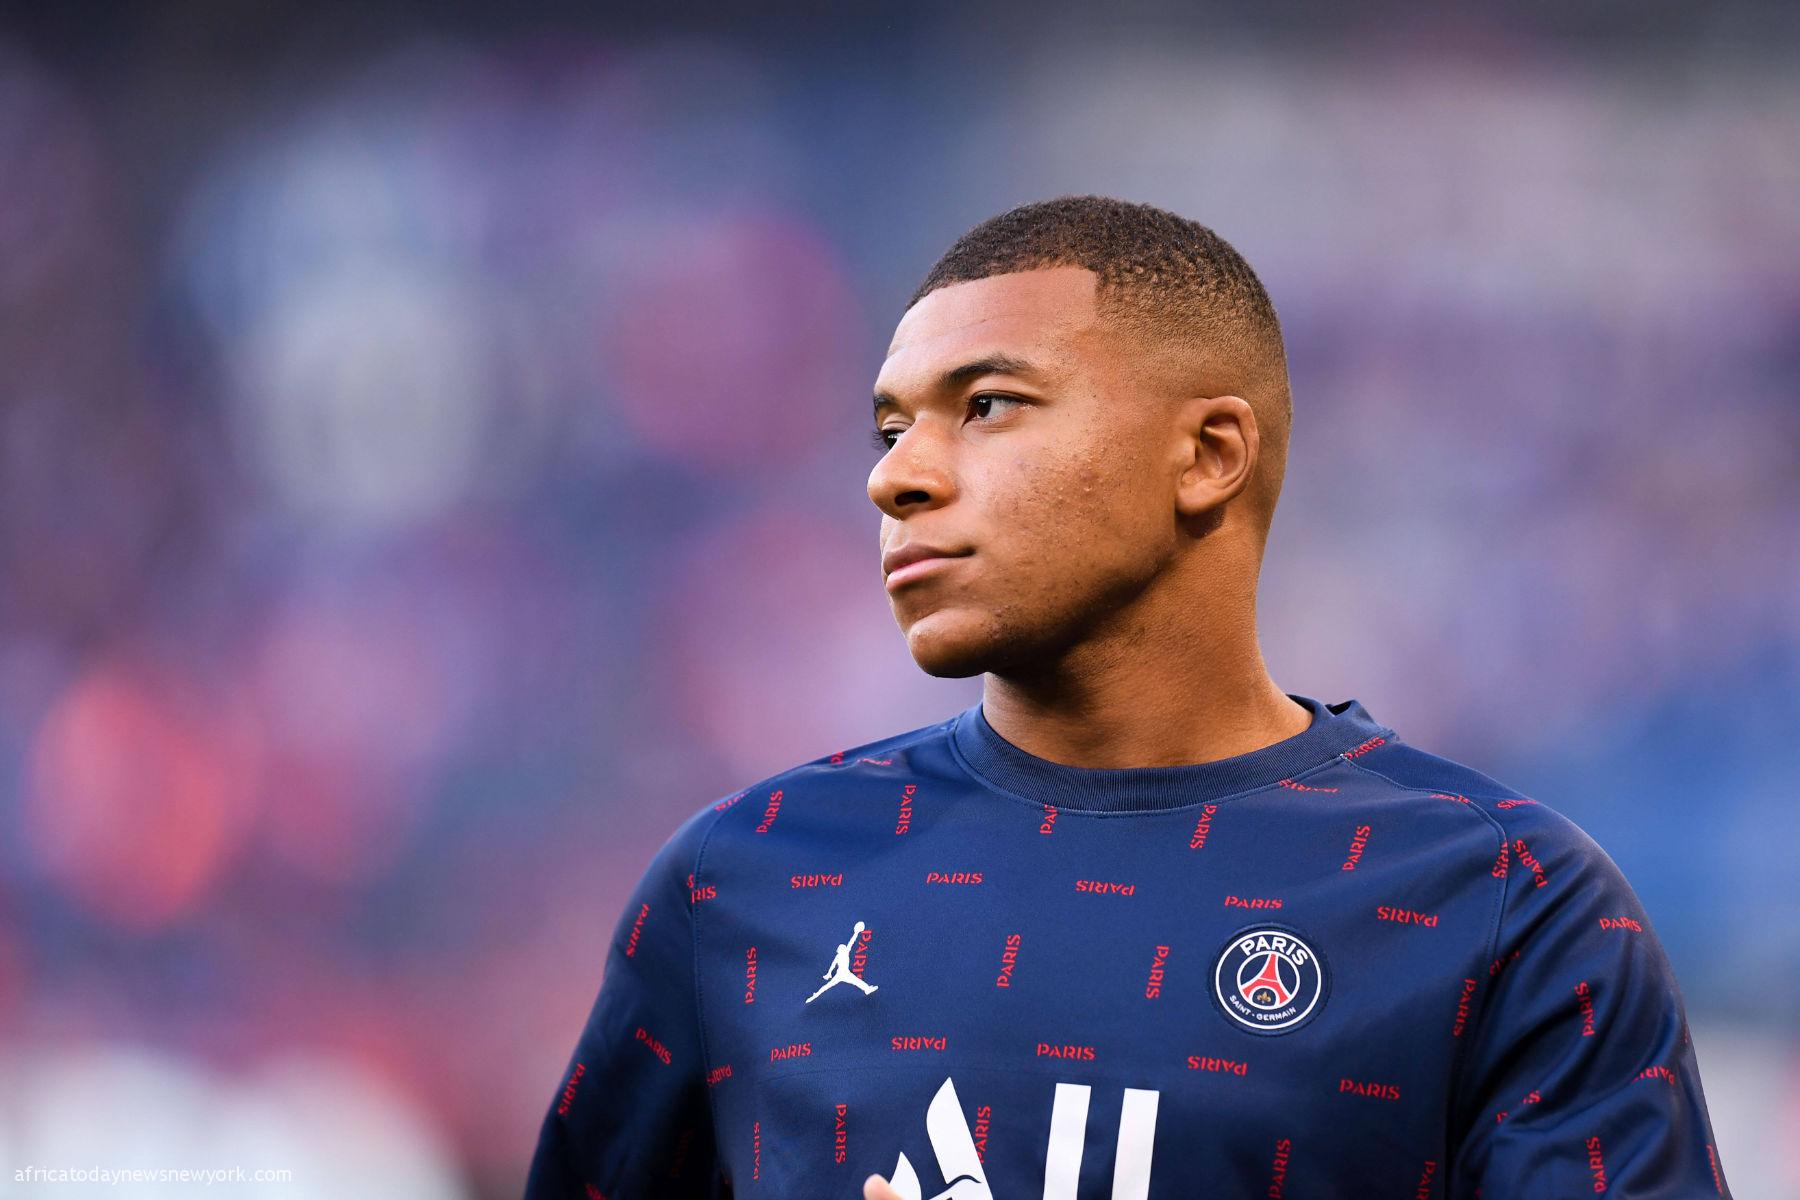 LaLiga To Drag PSG To UEFA Over Mbappe’s Contract